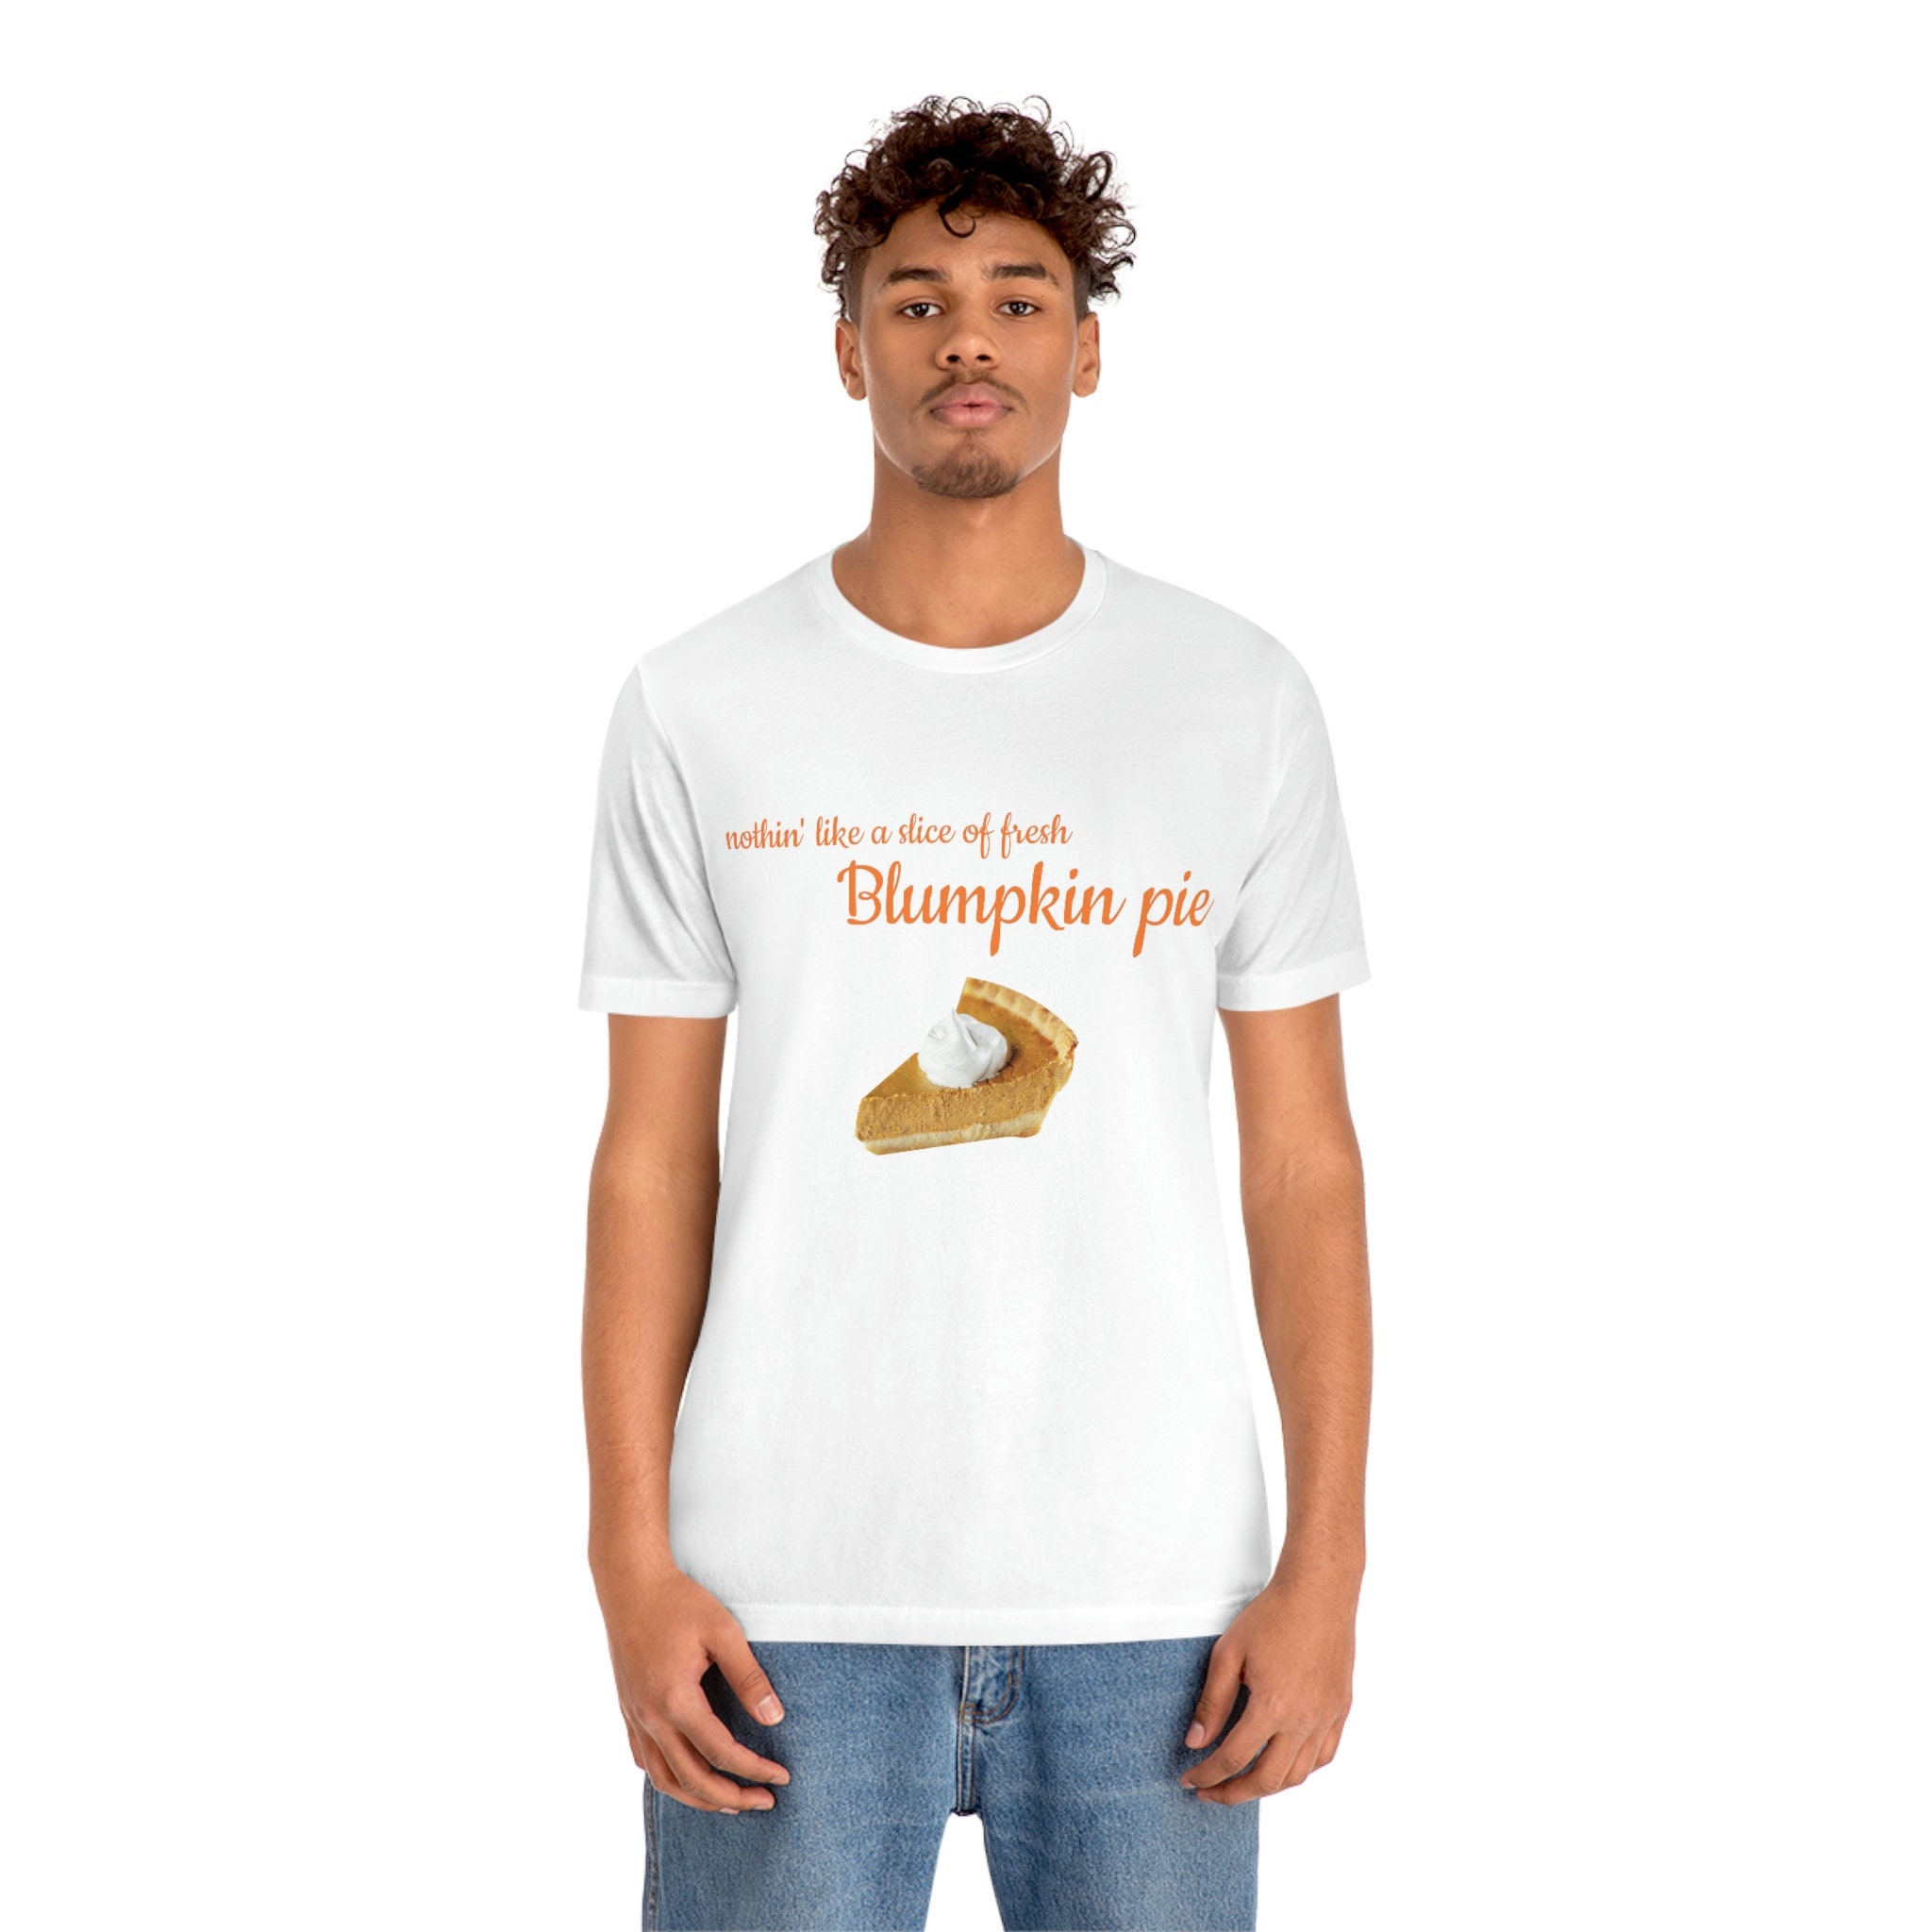 branden thorne recommends what is a blumpkin pie pic